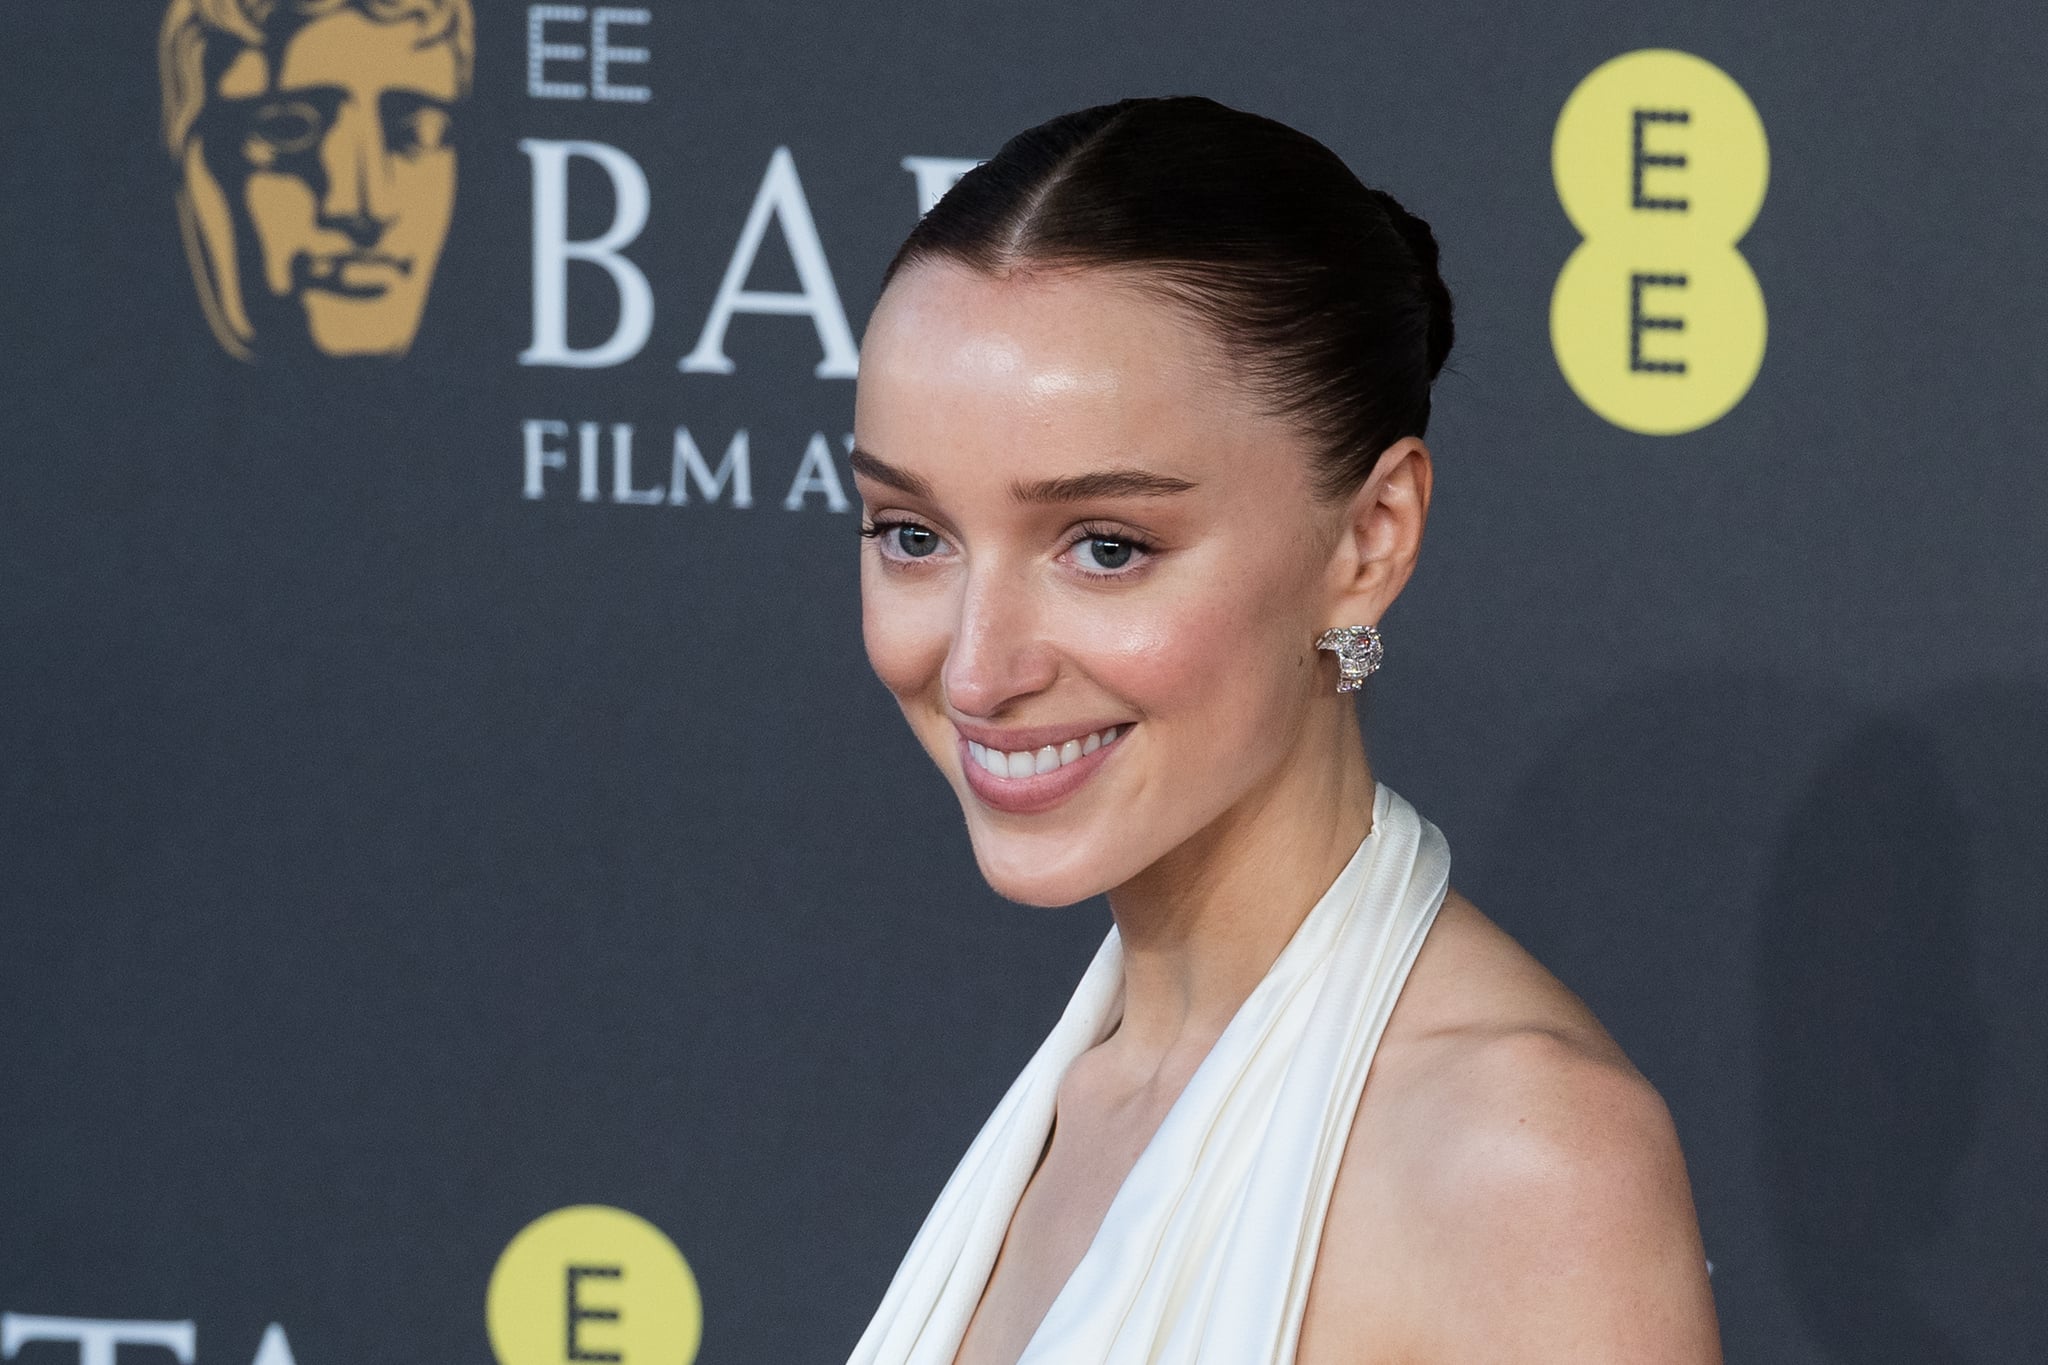 LONDON, UNITED KINGDOM - FEBRUARY 18, 2024: Phoebe Dynevor attends the EE BAFTA Film Awards ceremony at The Royal Festival Hall in London, United Kingdom on February 18, 2024. (Photo credit should read Wiktor Szymanowicz/Future Publishing via Getty Images)